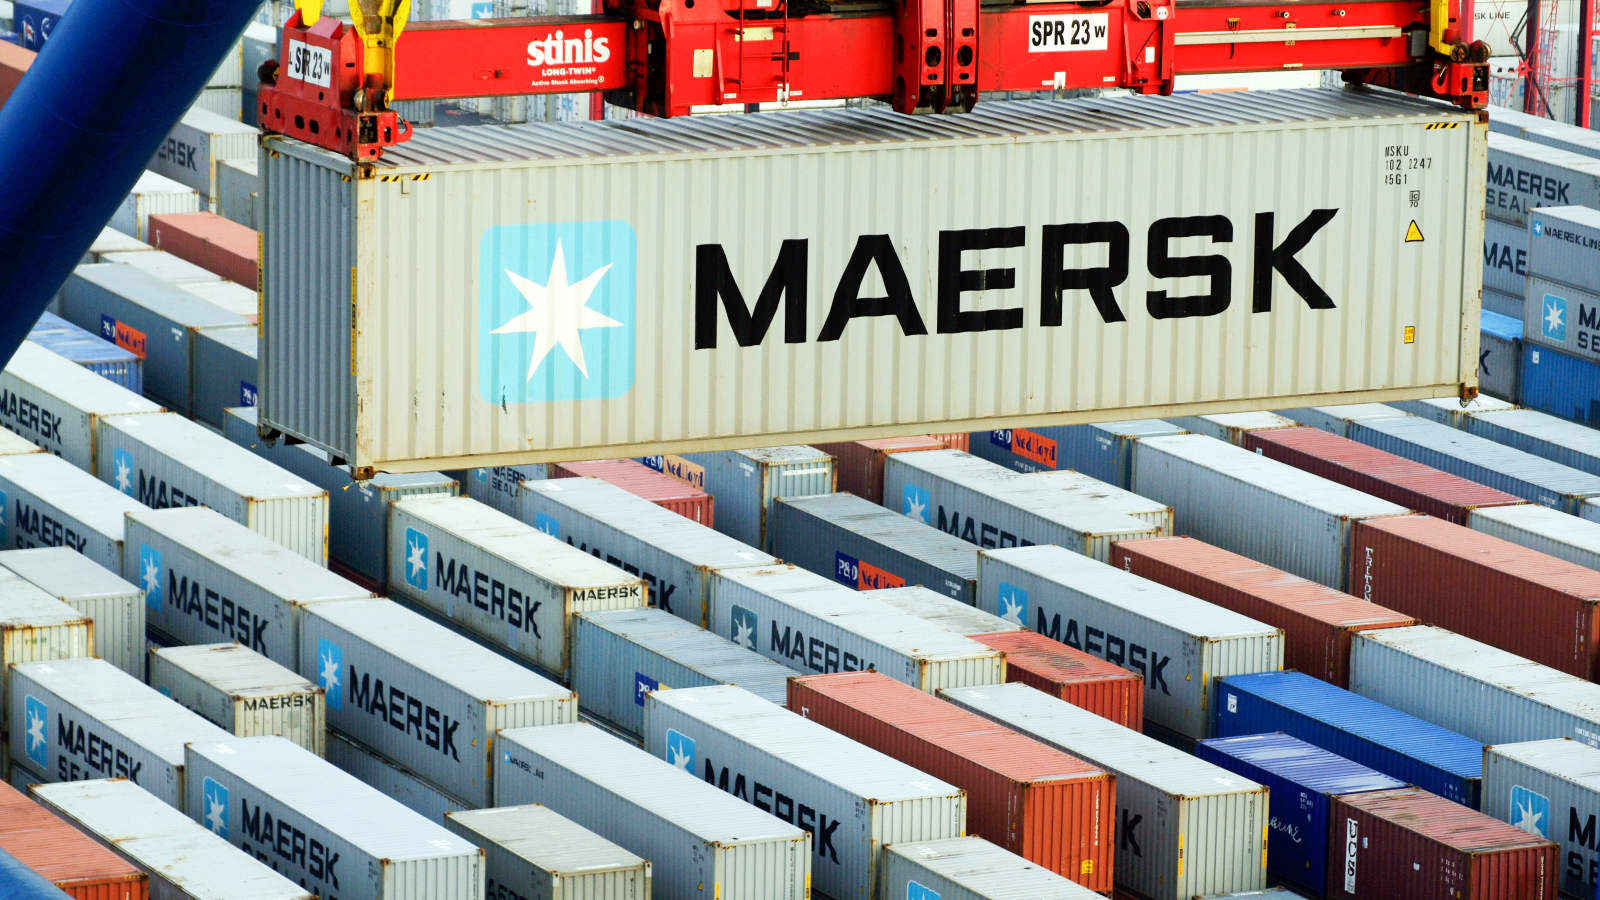 shuffle Introduce Inca Empire Shipper Moller-Maersk on US-China tensions, threats to global trade